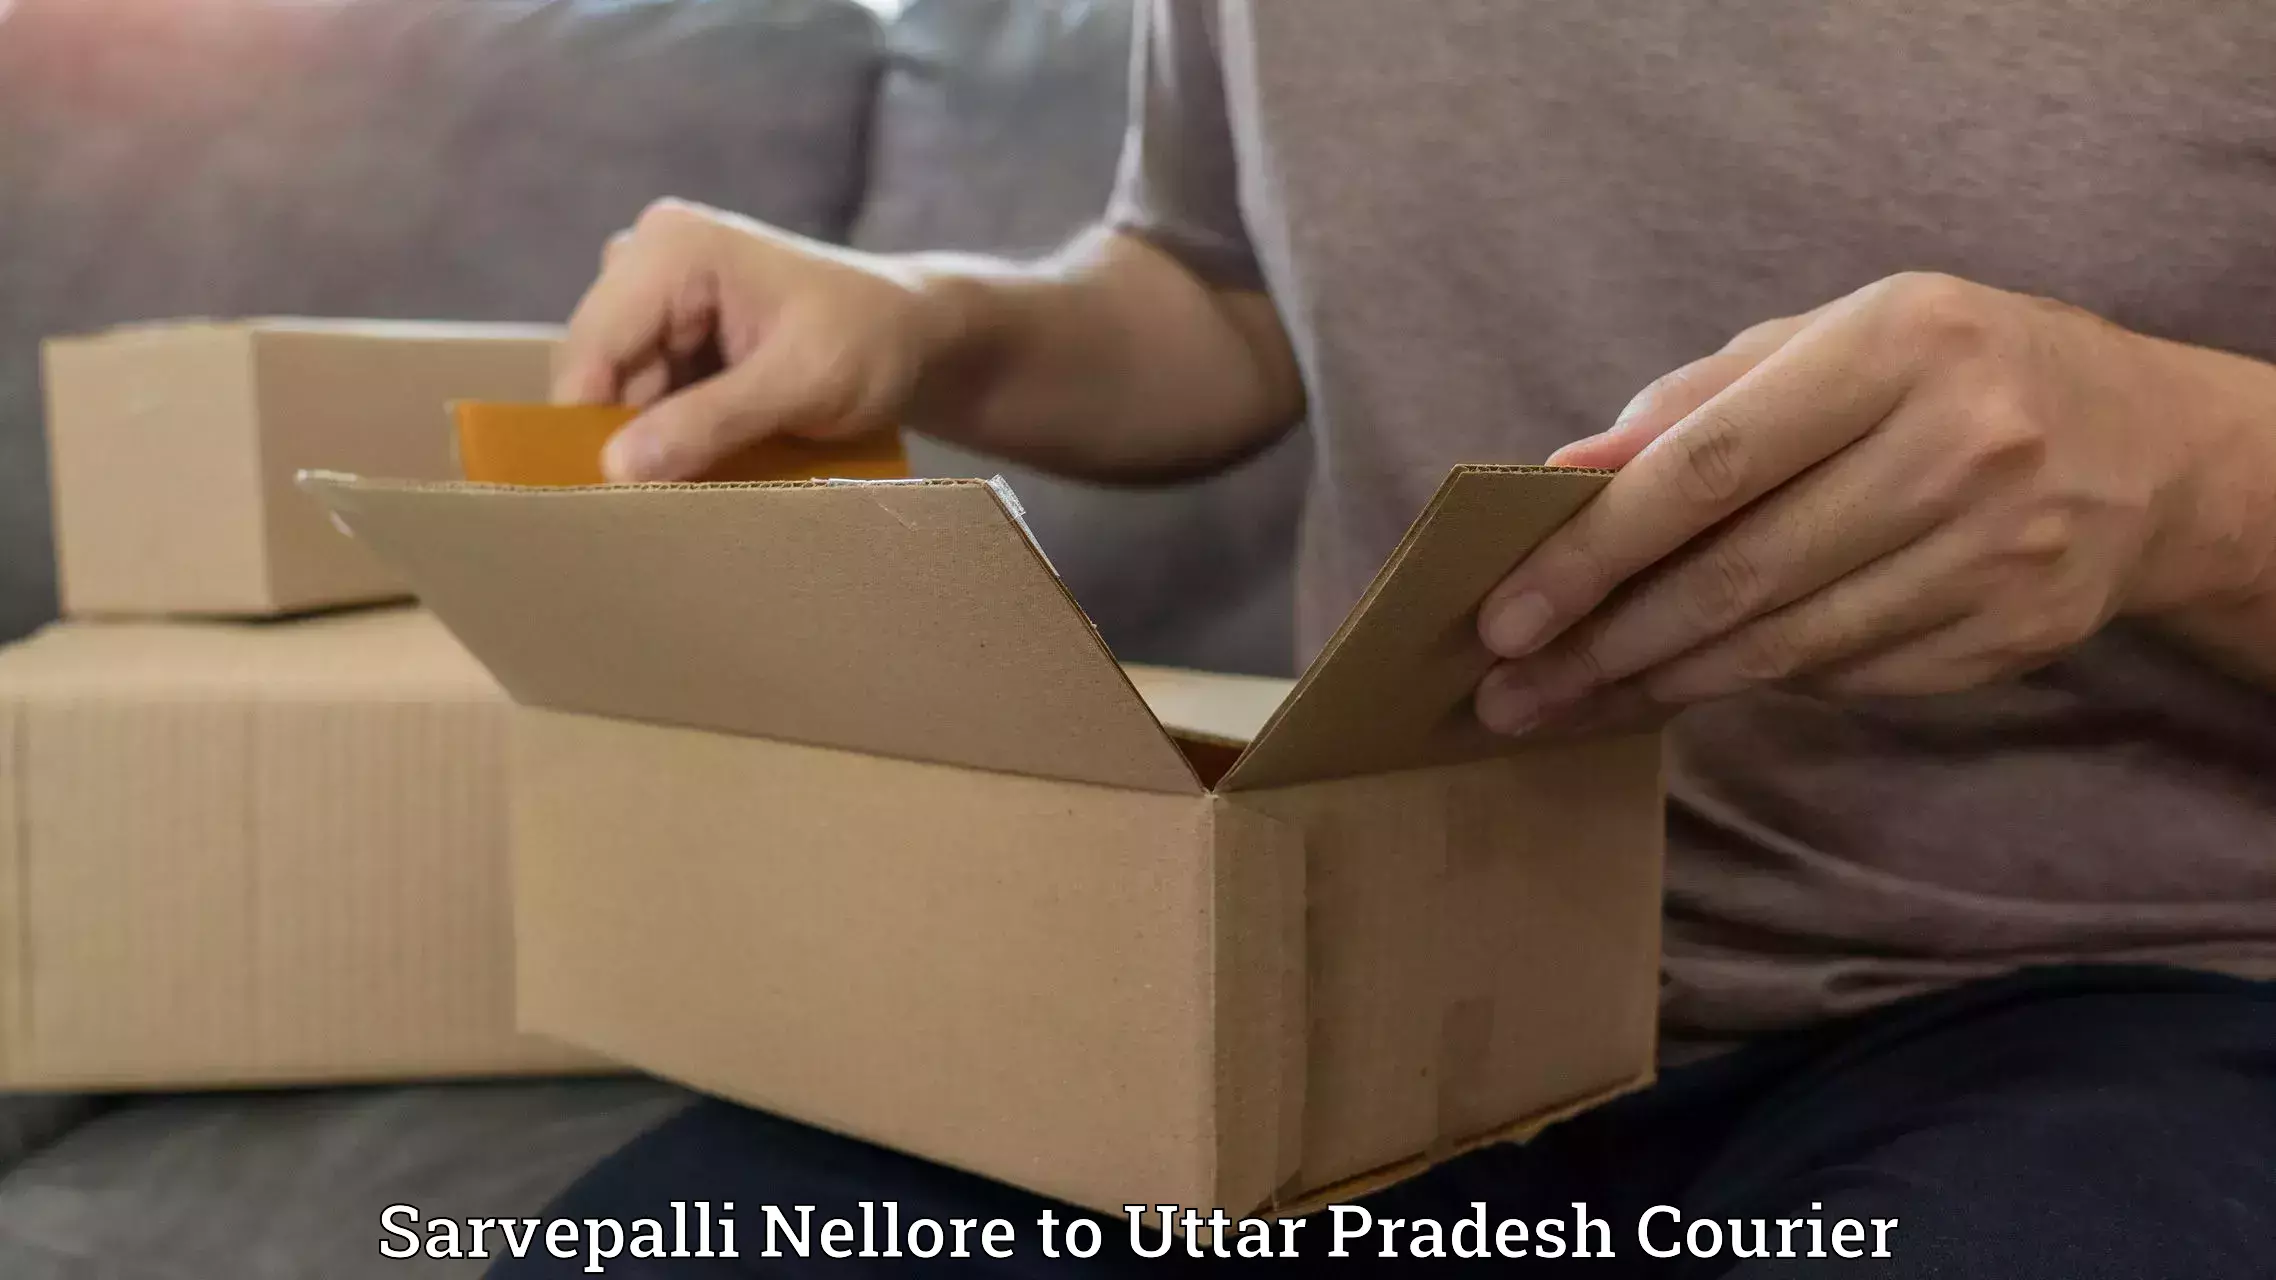 Corporate courier solutions Sarvepalli Nellore to Sultanpur Avadh